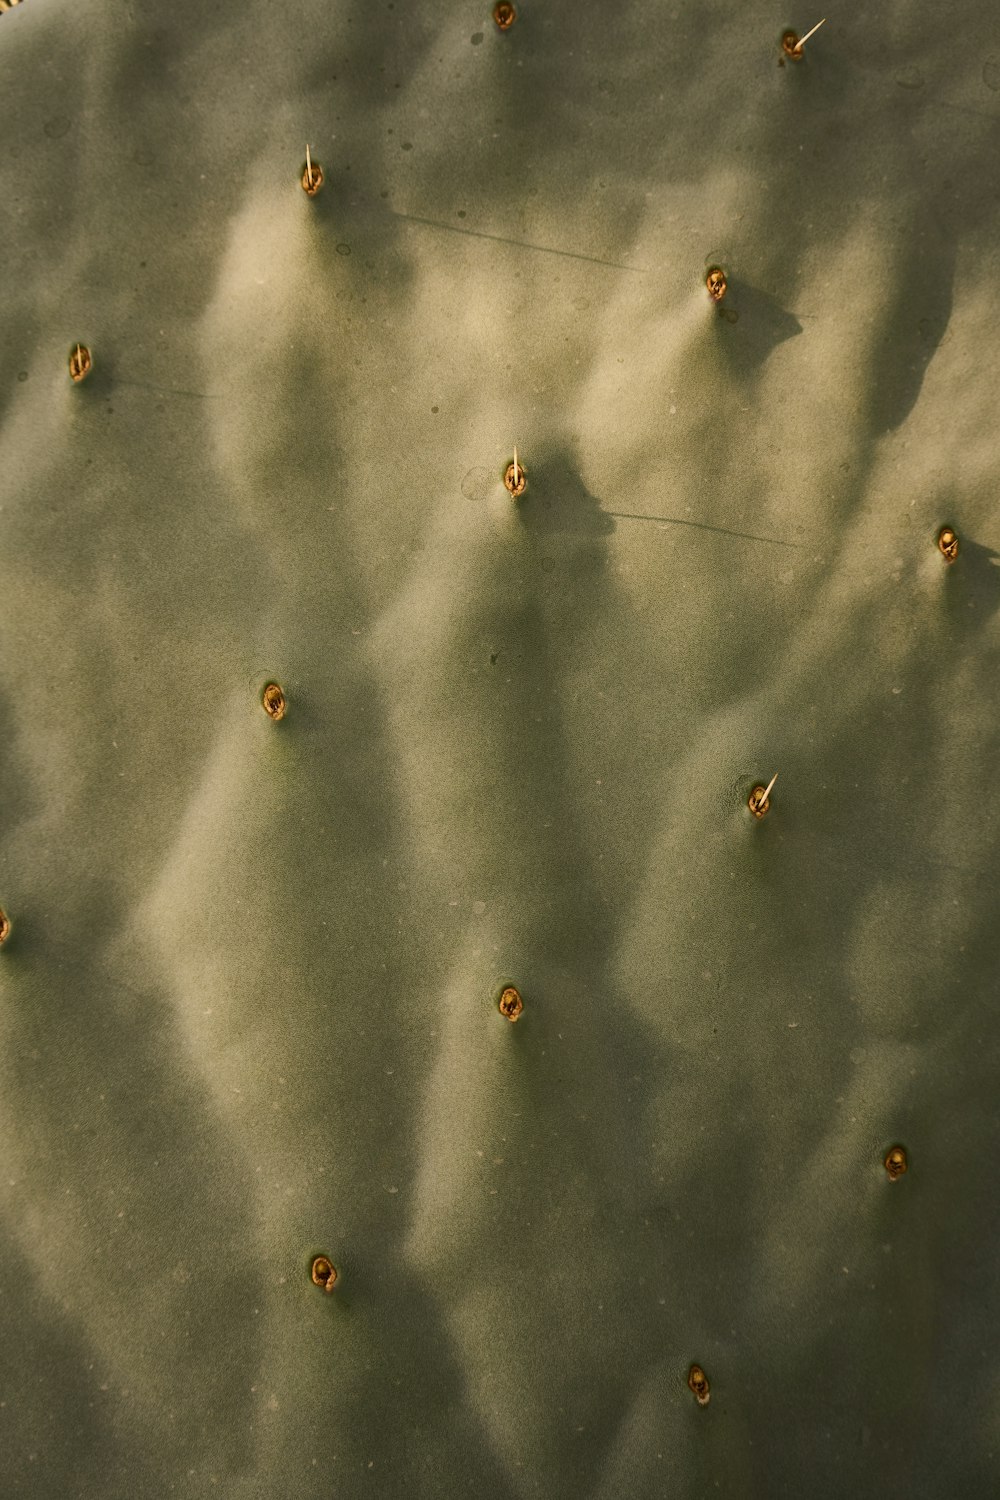 a close up of a cactus with many small flowers